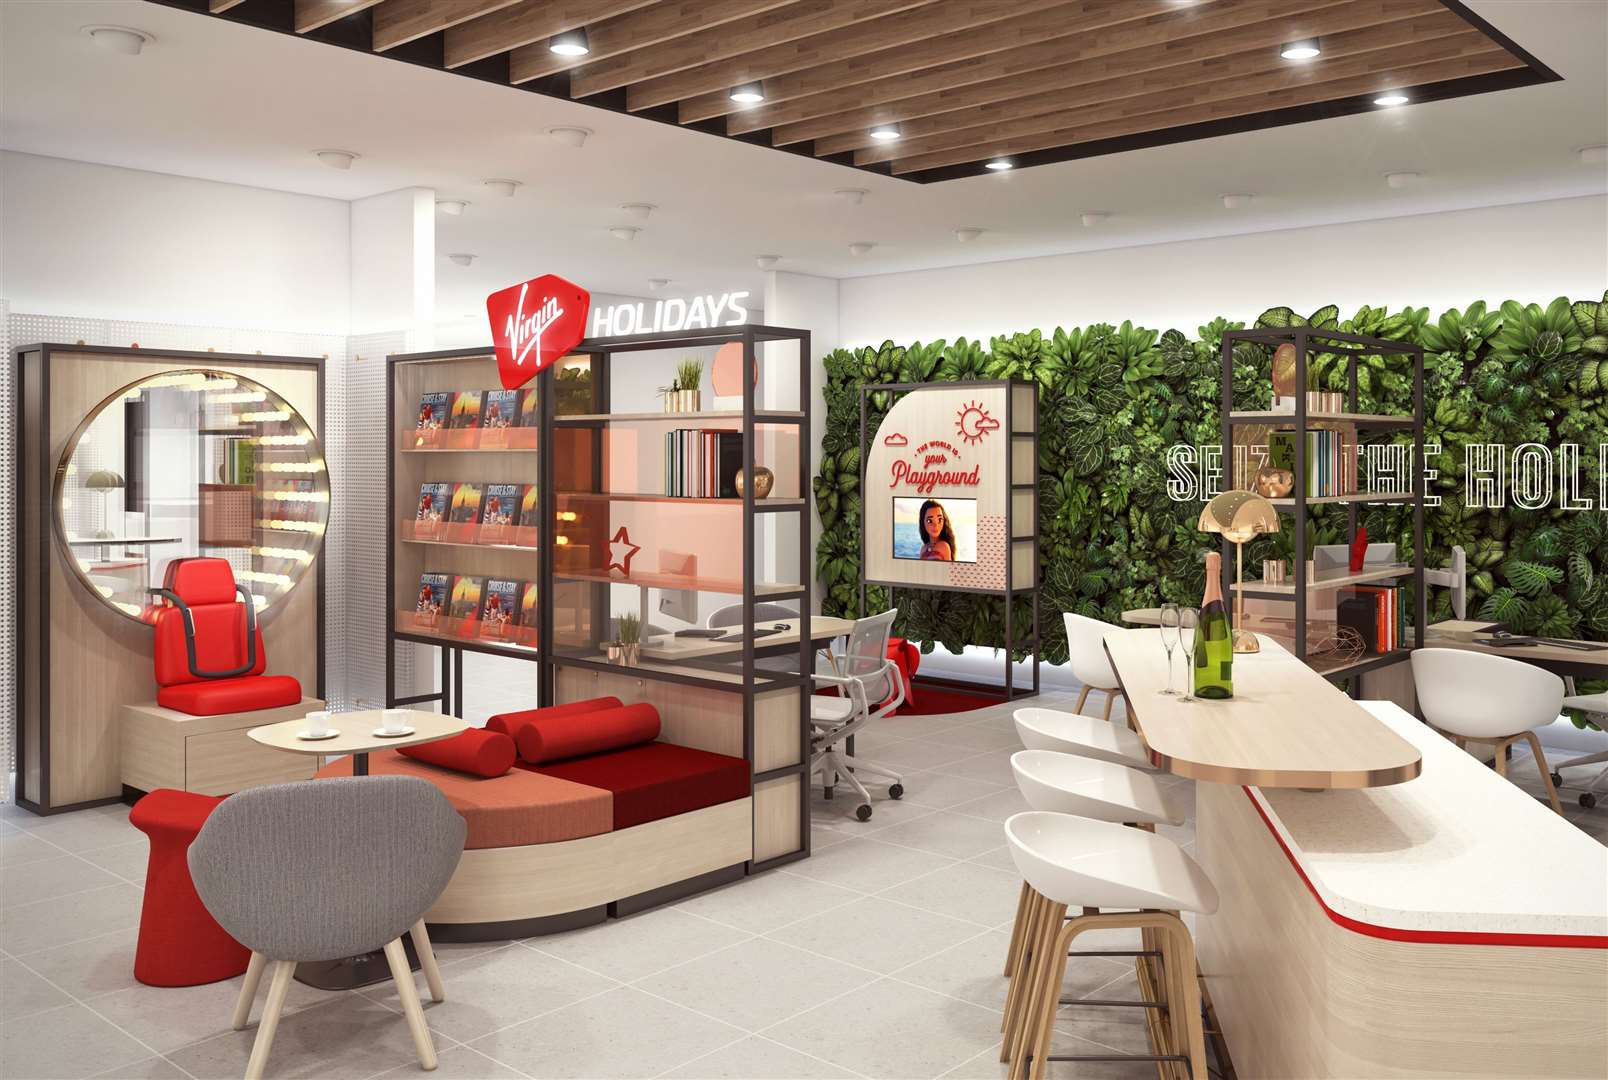 The Virgin Holidays concession will feature a bar. Pic: Virgin Holidays